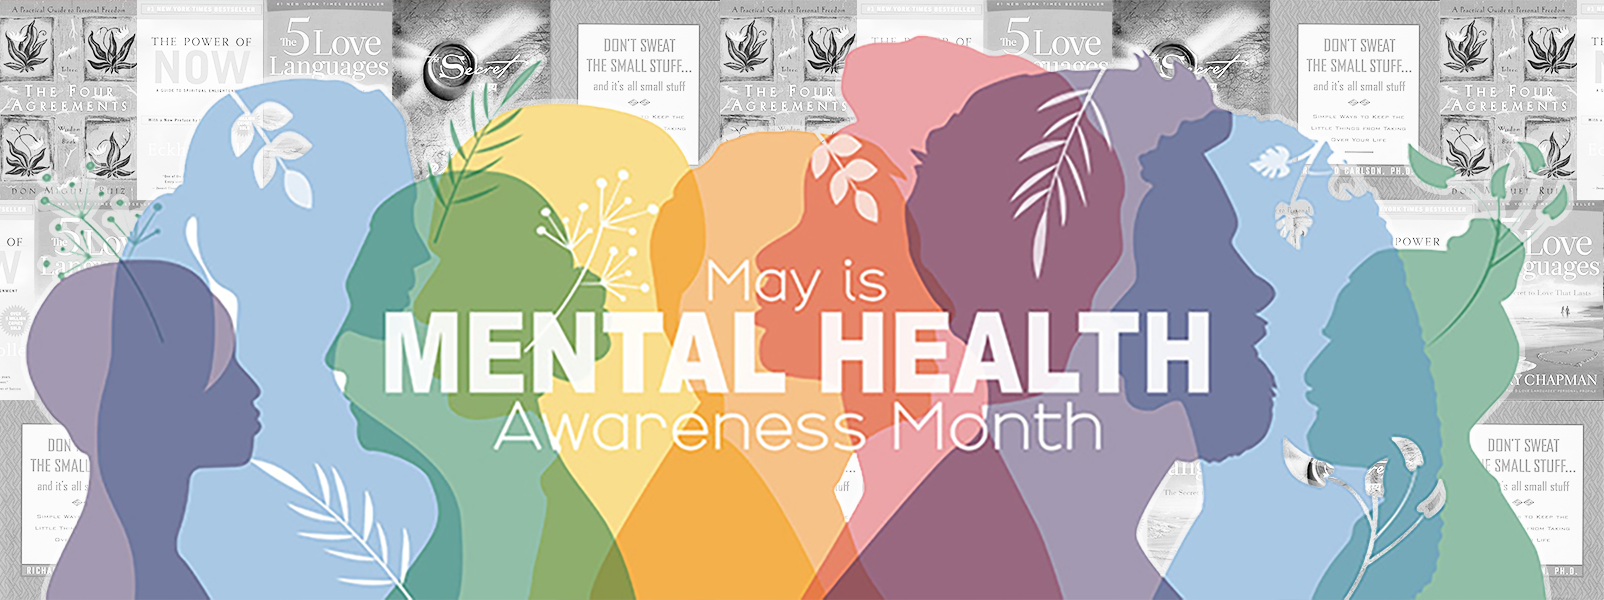 May-is-Mental-Health-Awareness-Month